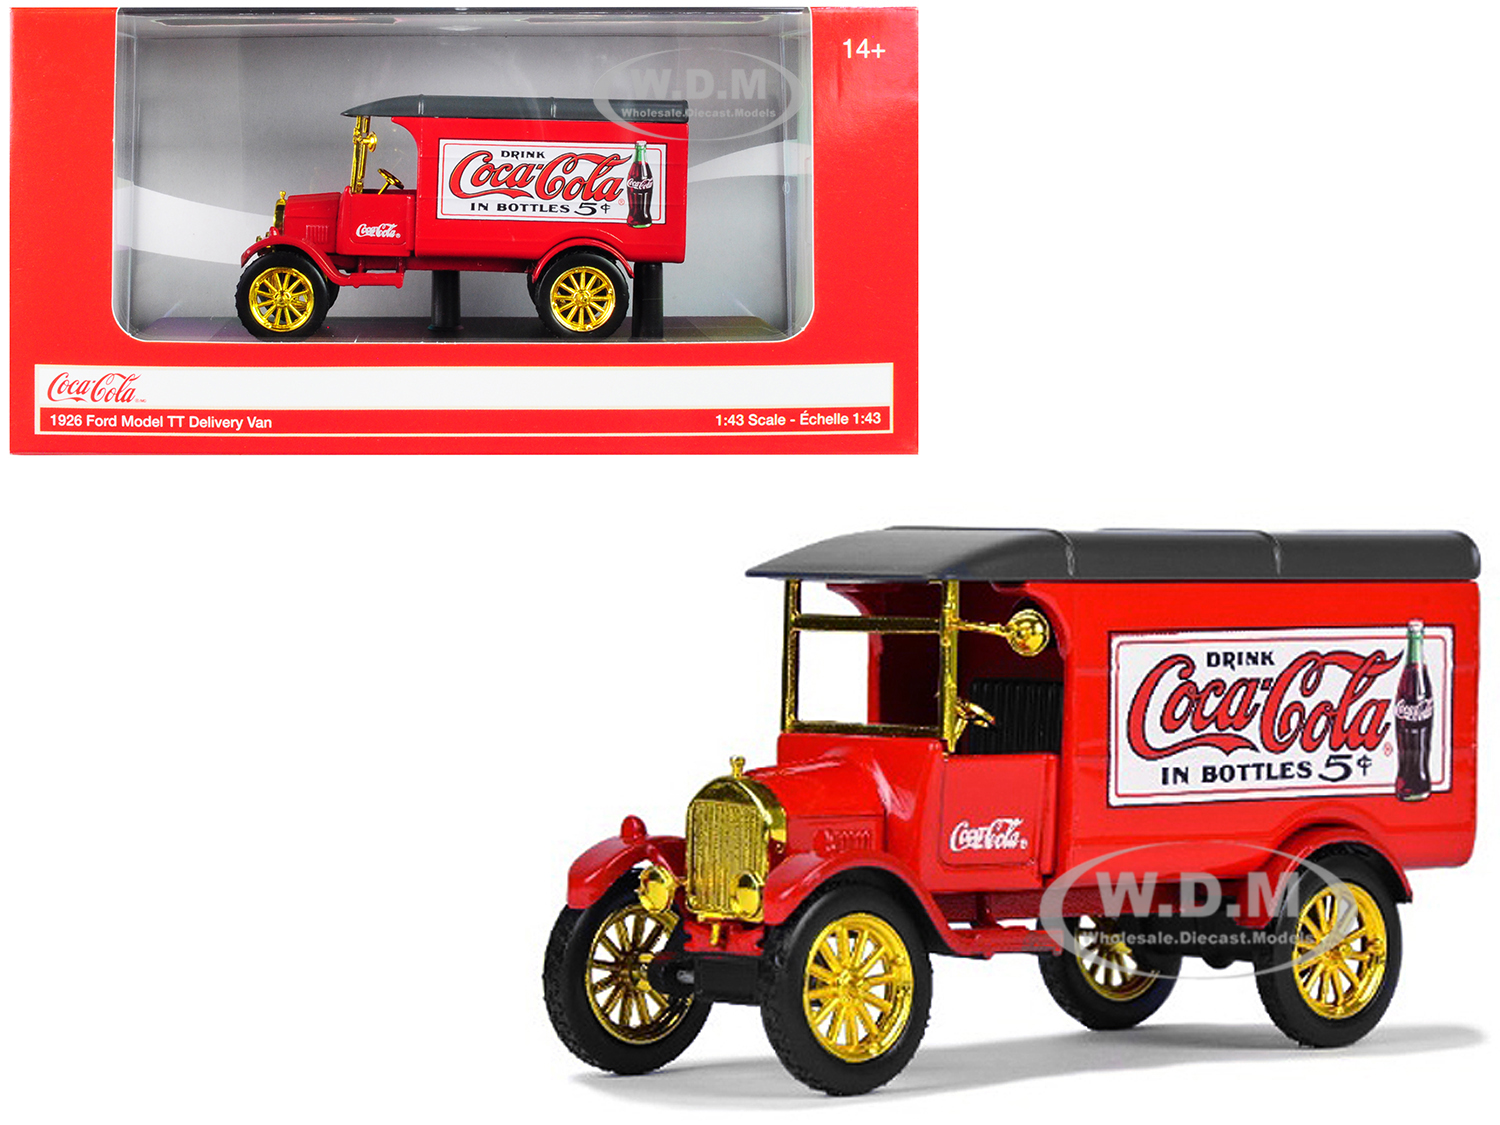 1926 Ford Model TT Delivery Van "Coca-Cola" Red with Gold Wheels 1/43 Diecast Model Car by Motor City Classics